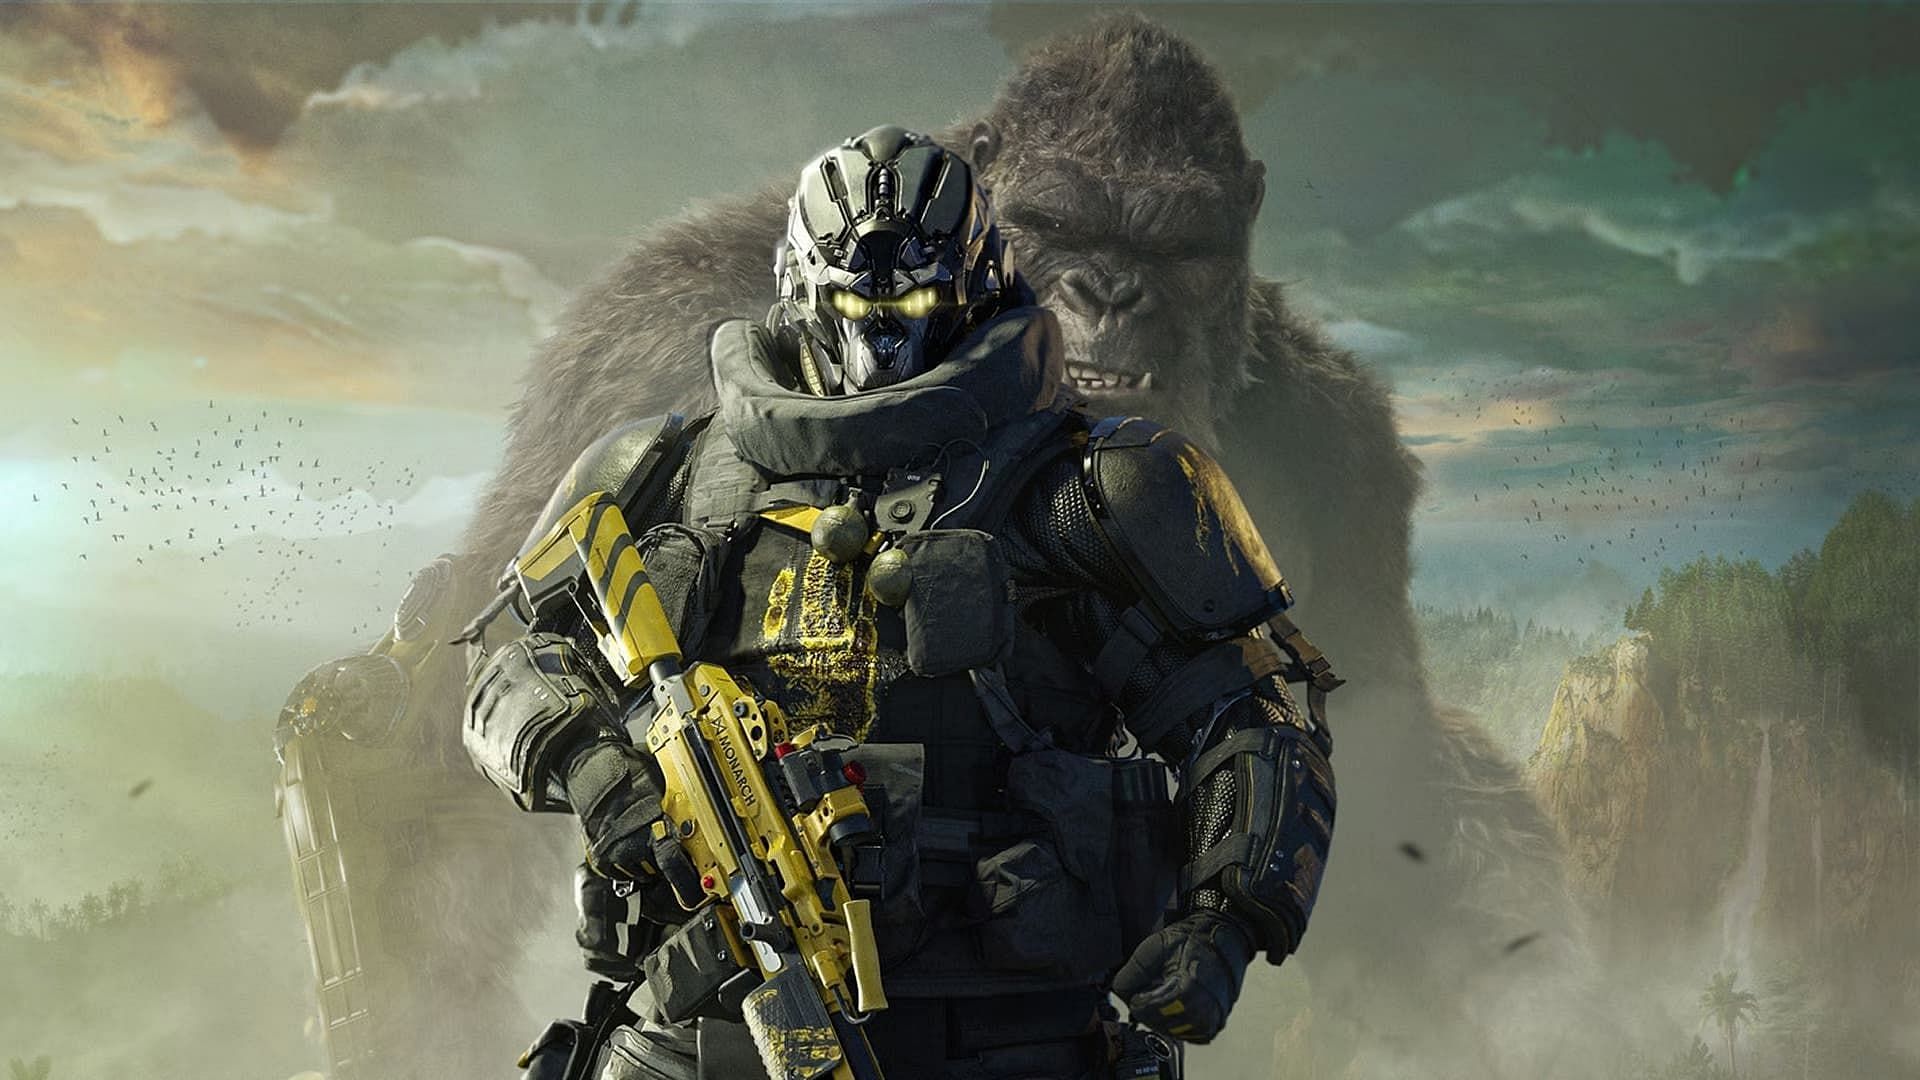 Godzilla x Kong Battle for Hollow Earth event (Image via Activision)